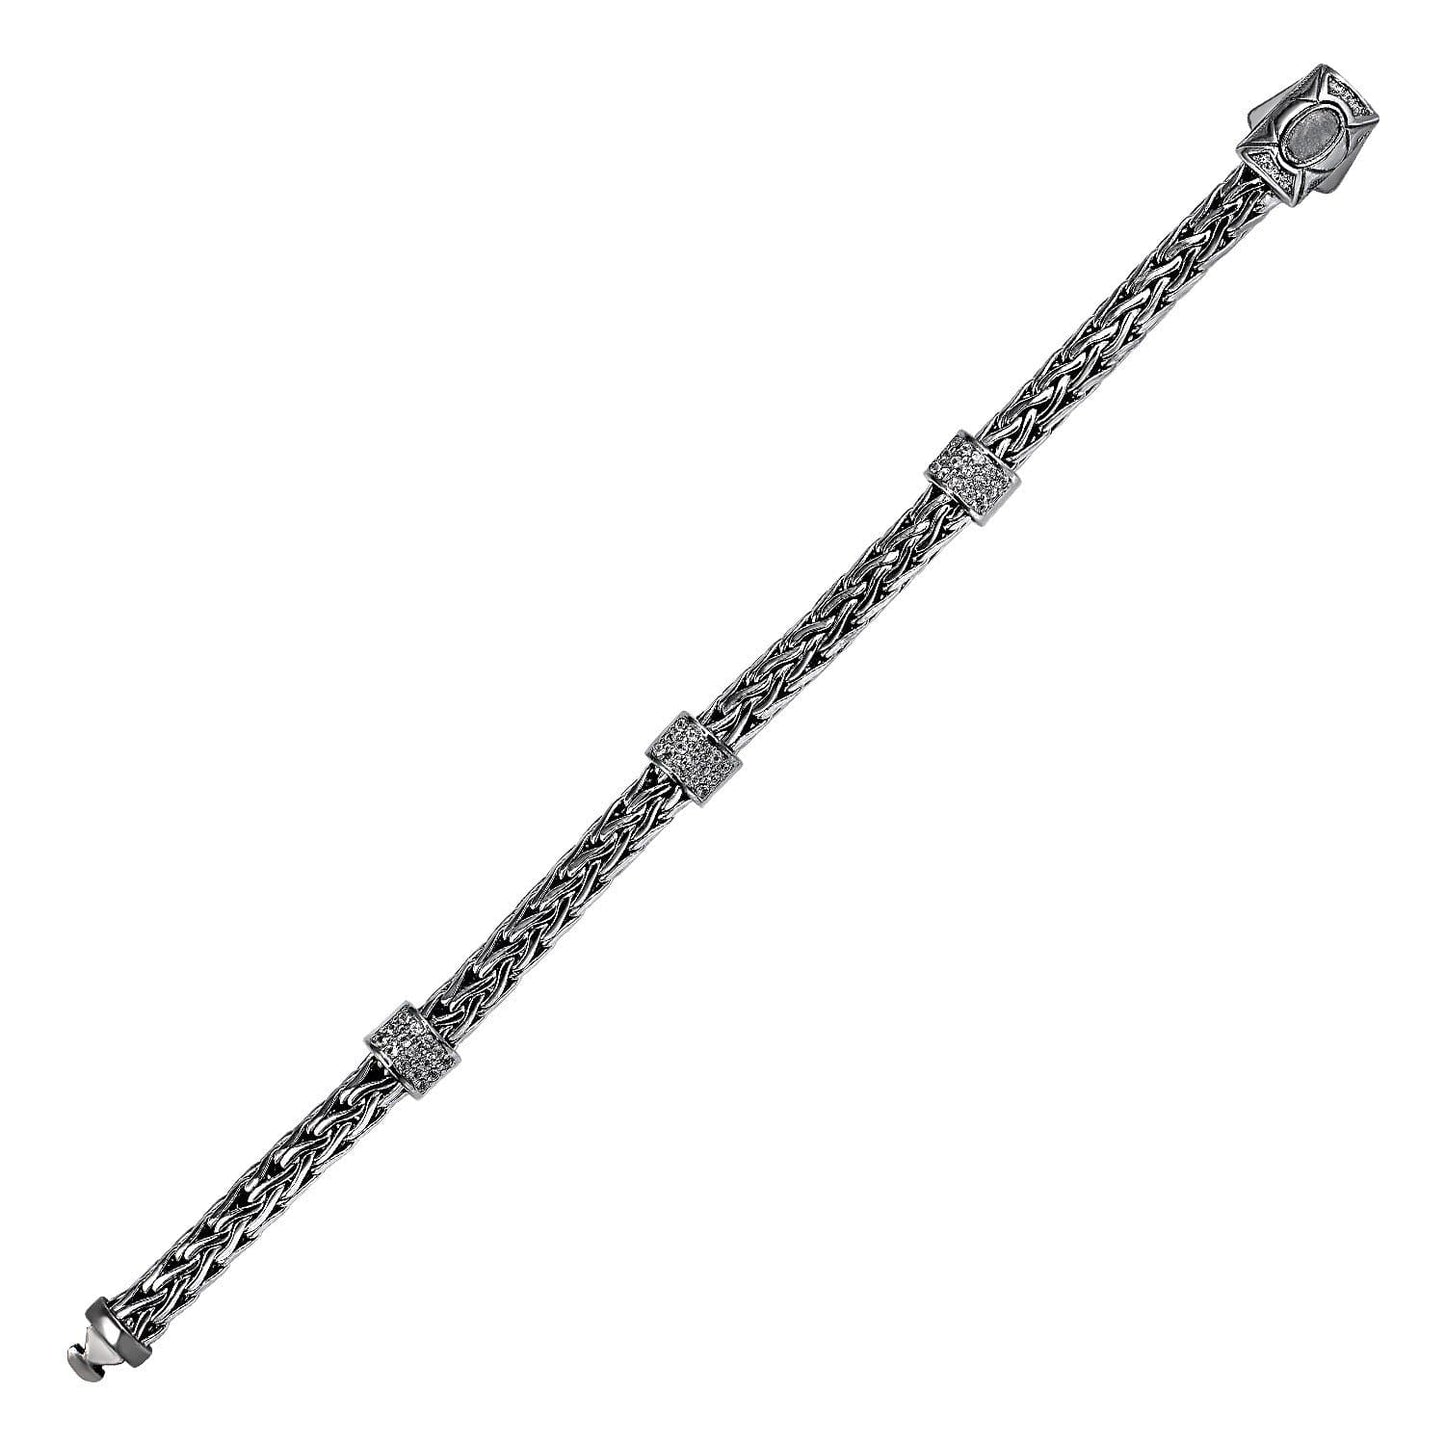 Woven Bracelet with White Sapphire Accents and Black Finish in Sterling Silver